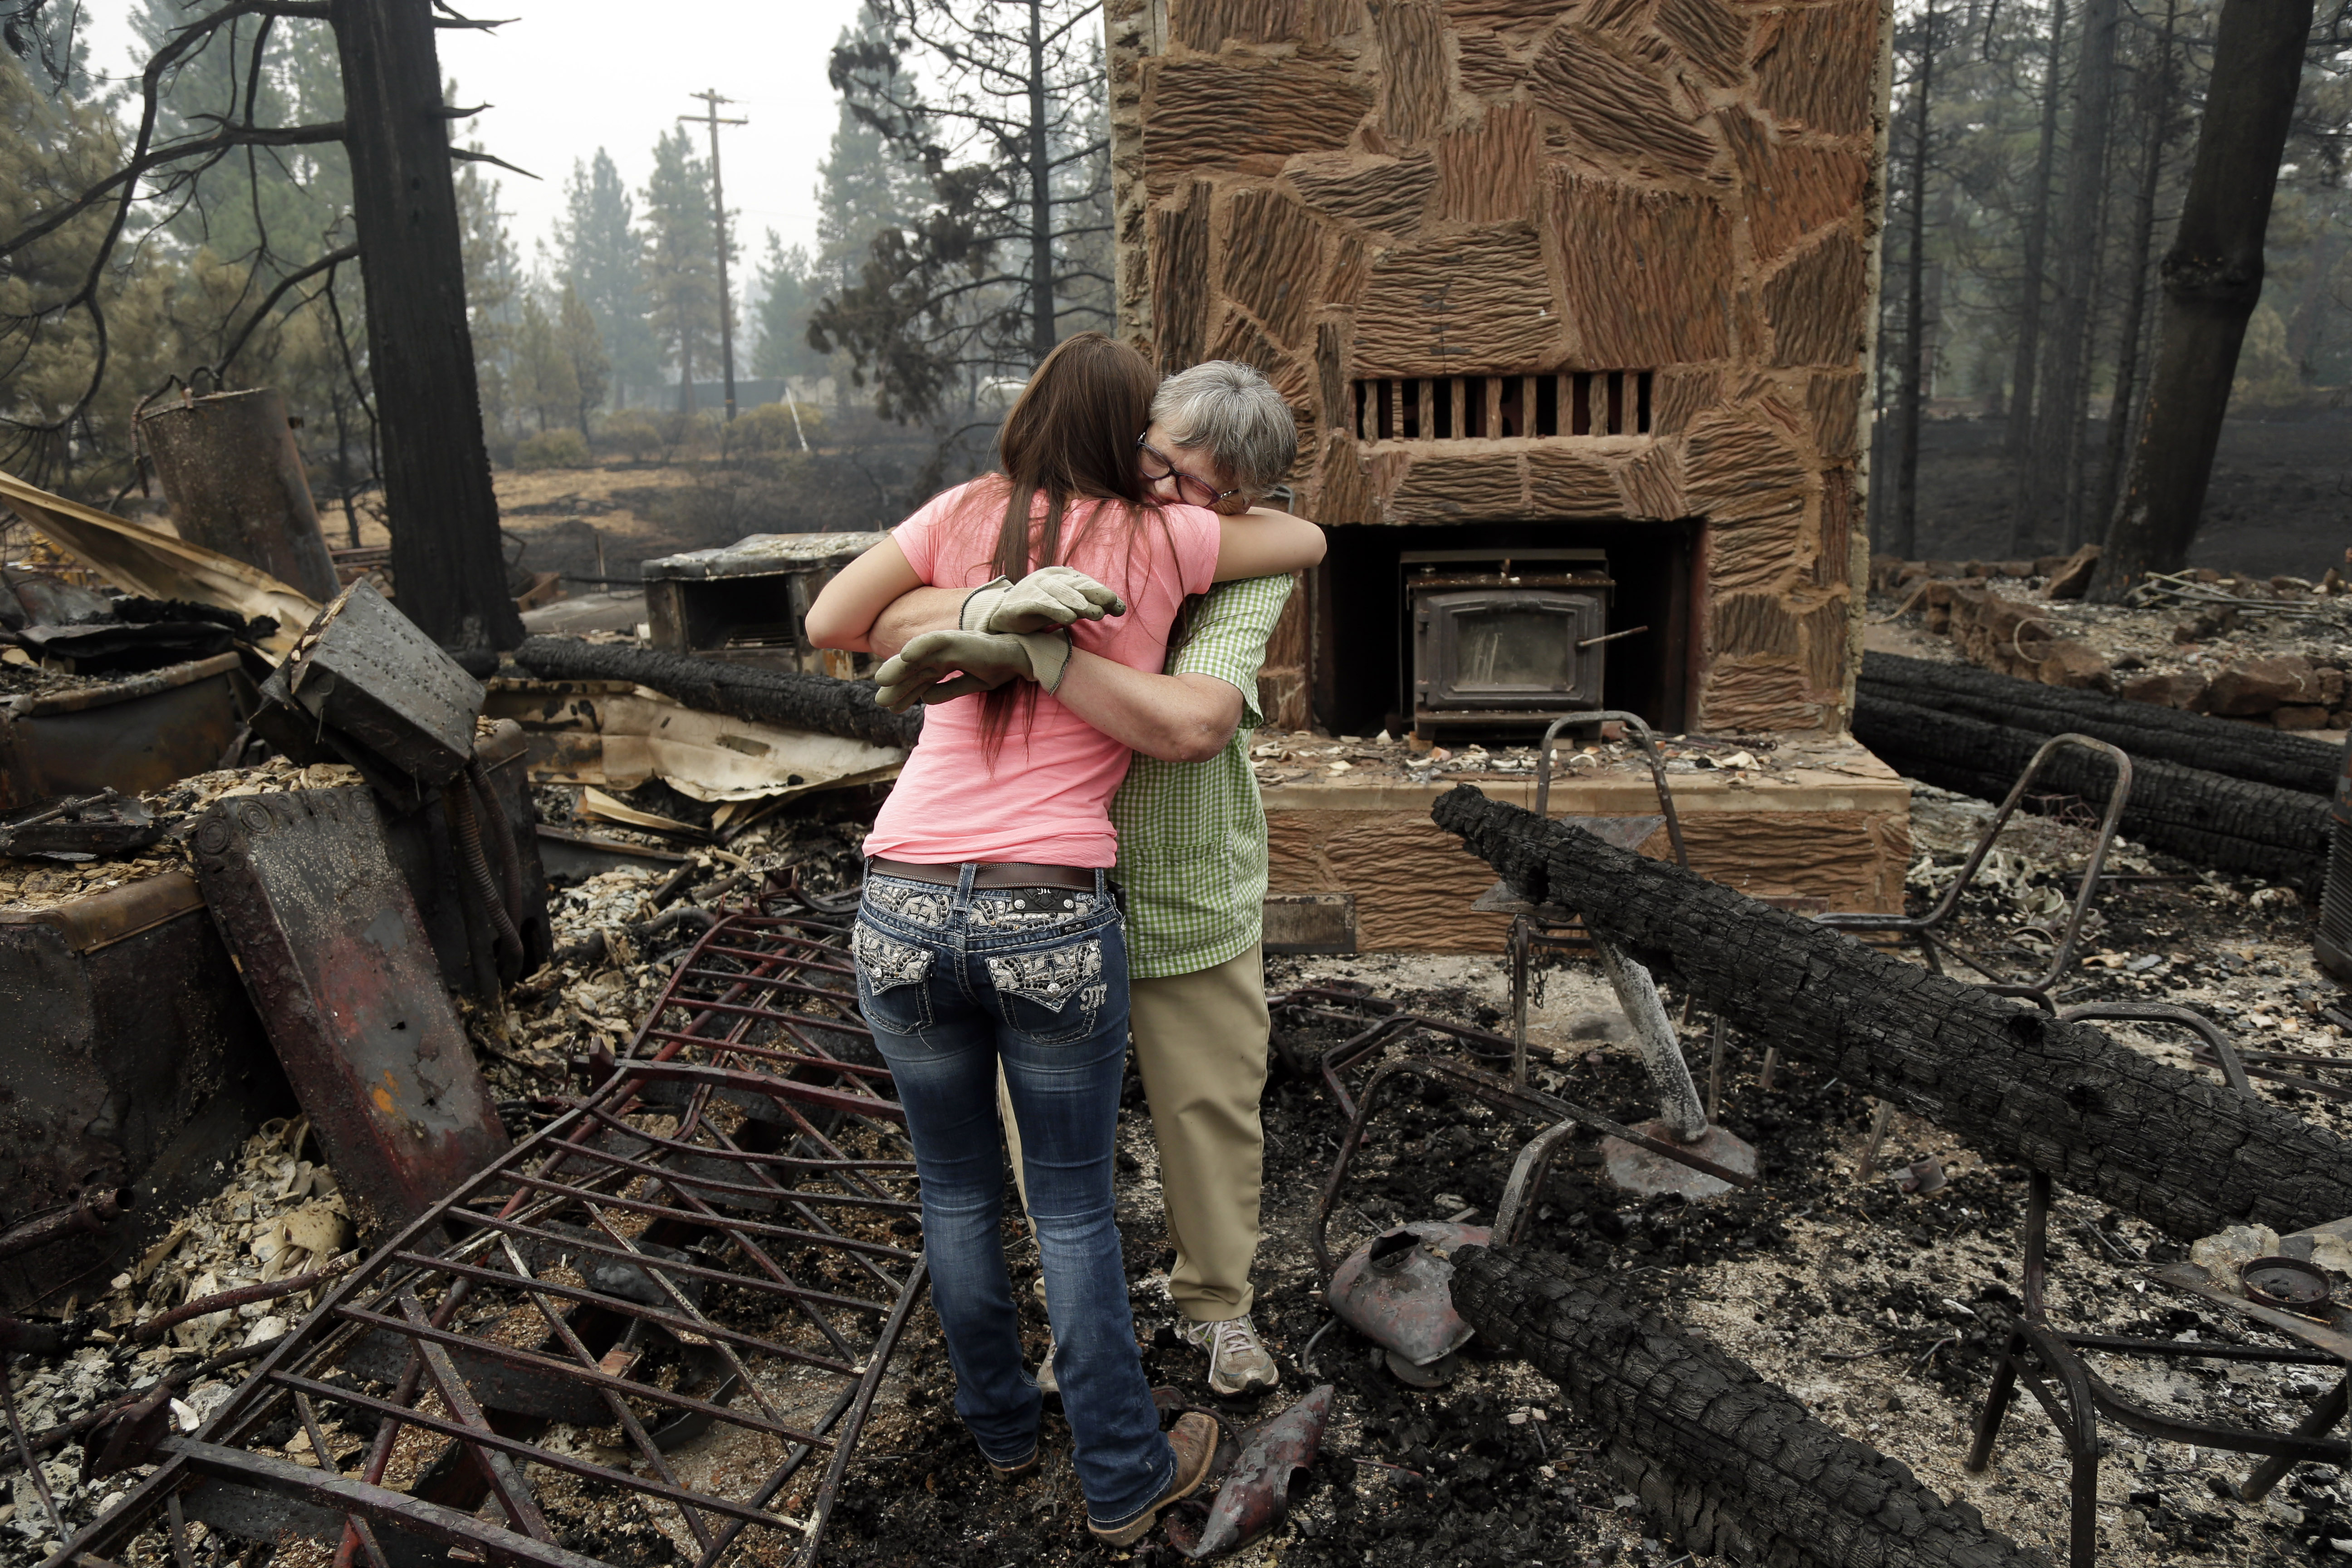 Donna Garner, right, embraces former employee Napua Gonsales-Merck while they shift through the remains of the Fireside Village, a restaurant and shop owned by the Garners for over 30 years, in the aftermath of the Eiler Fire on Tuesday, Aug. 5, 2014, in Hat Creek, Calif. Light rain and higher humidity are helping crews make progress in their fight against two wildfires in the Northern California forest that are just miles apart. (AP Photo/Marcio Jose Sanchez)